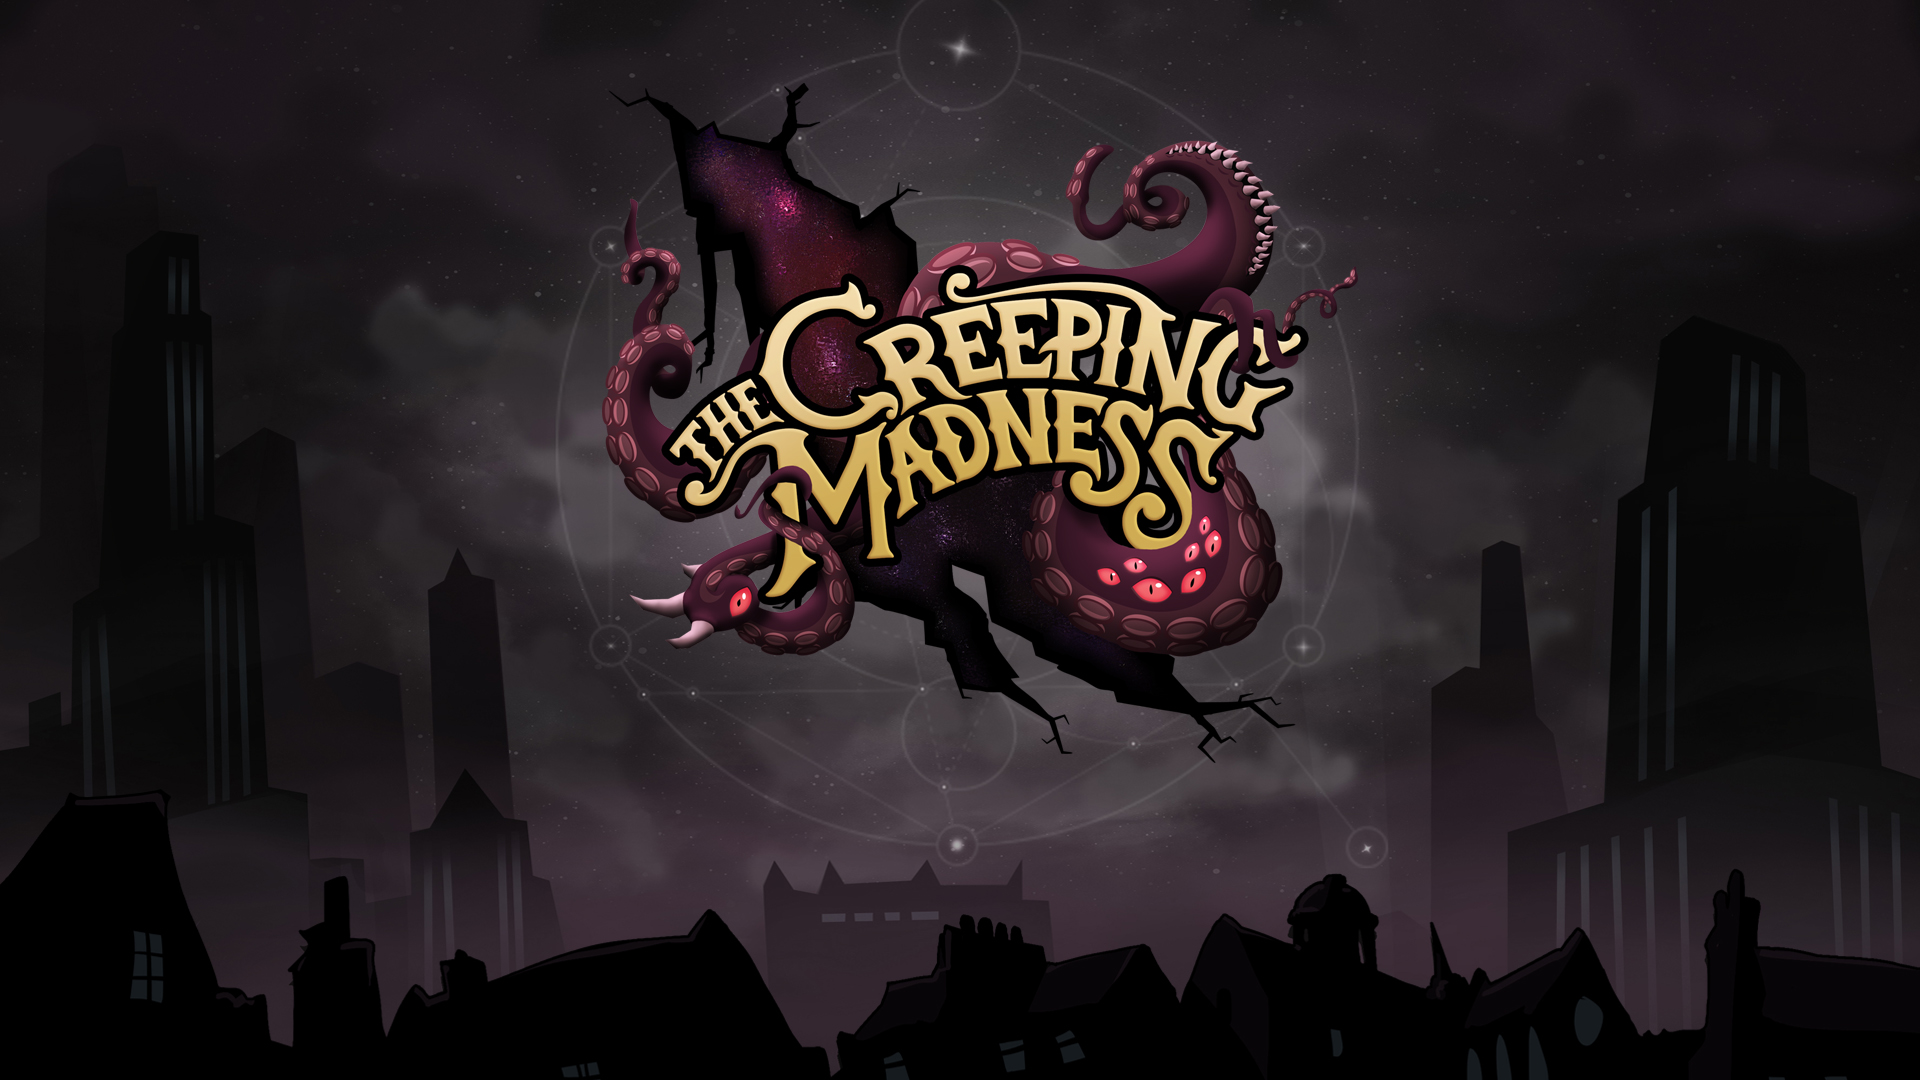 The Creeping Madness